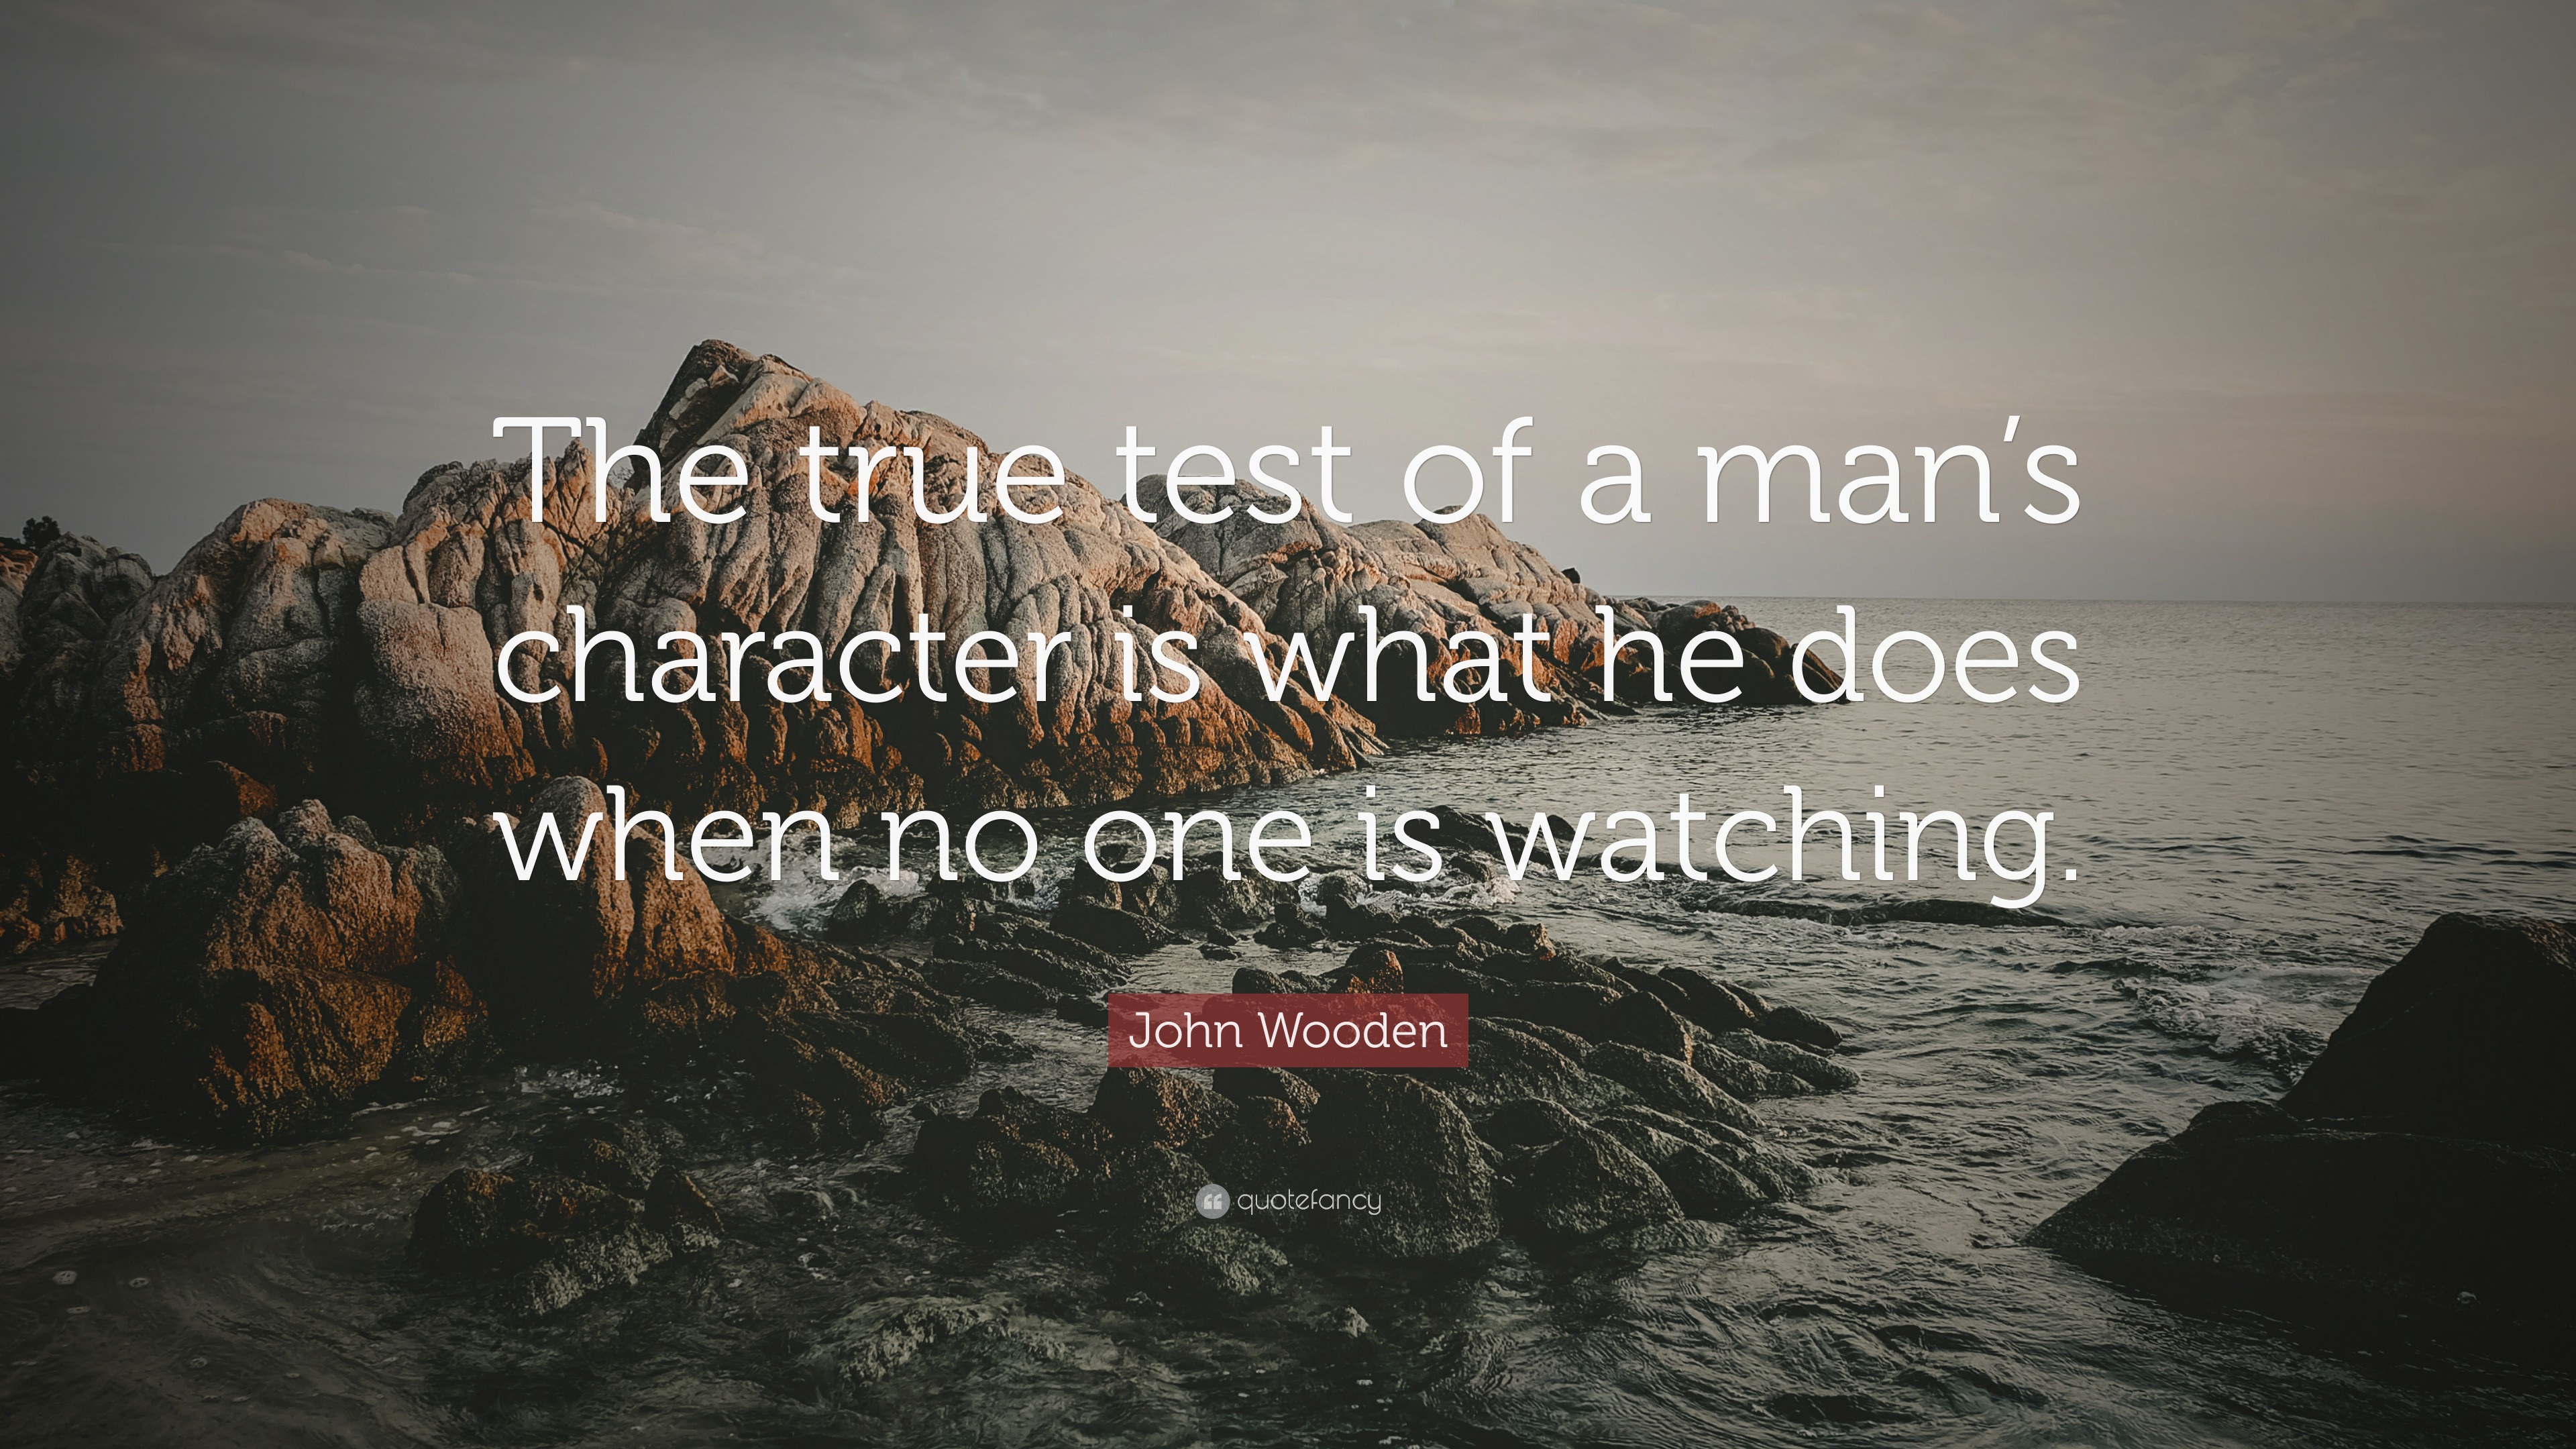 John Wooden Quote: “The true test of a man’s character is what he does